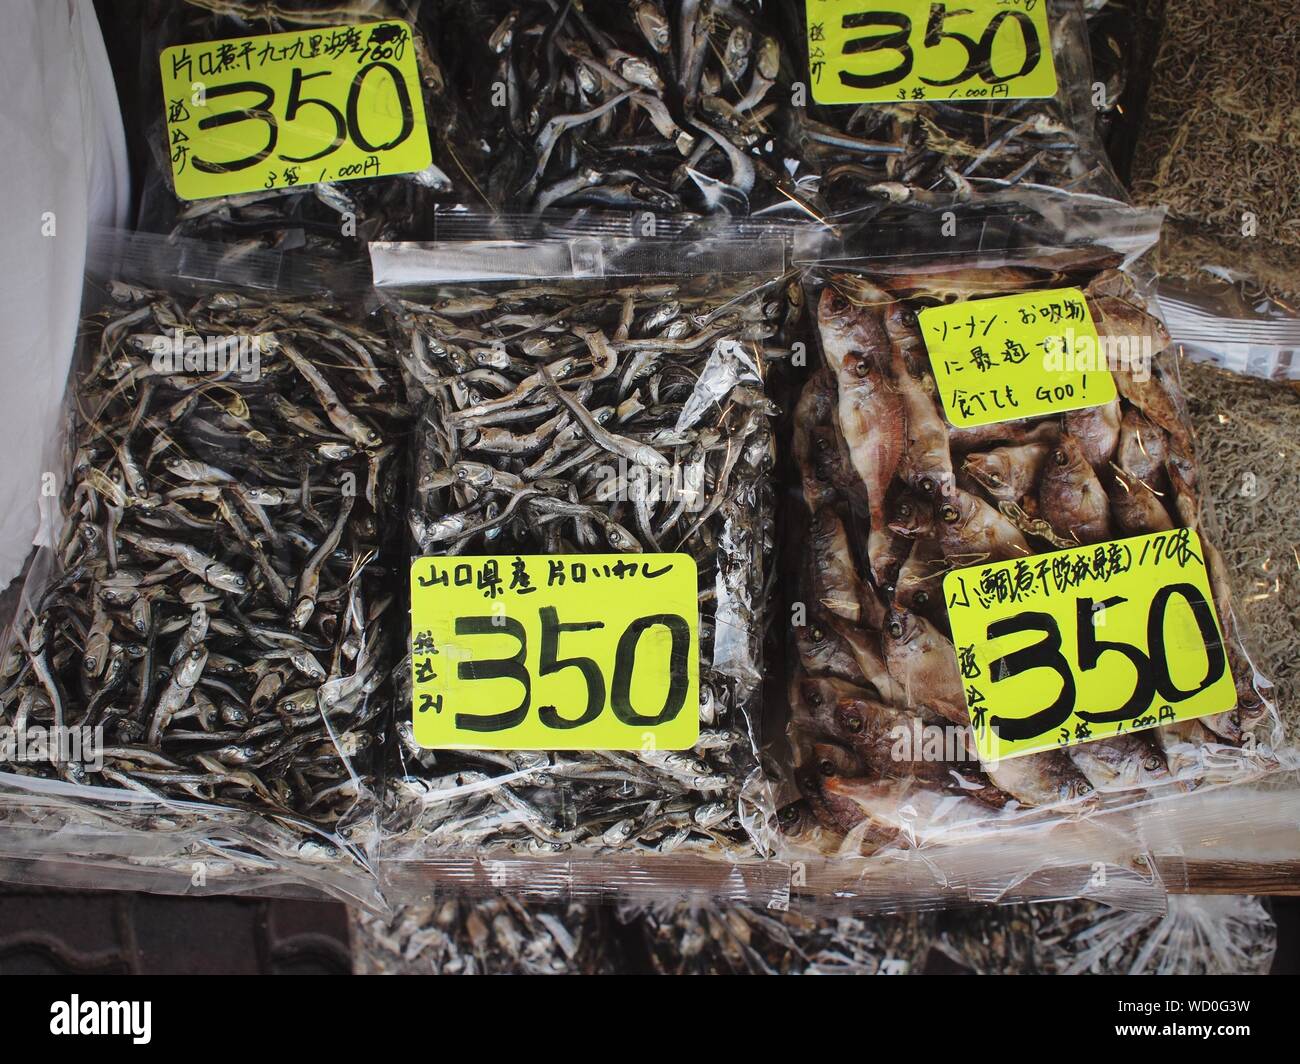 Download High Angle View Of Dried Fish In Plastic Bag For Sale Stock Photo Alamy Yellowimages Mockups